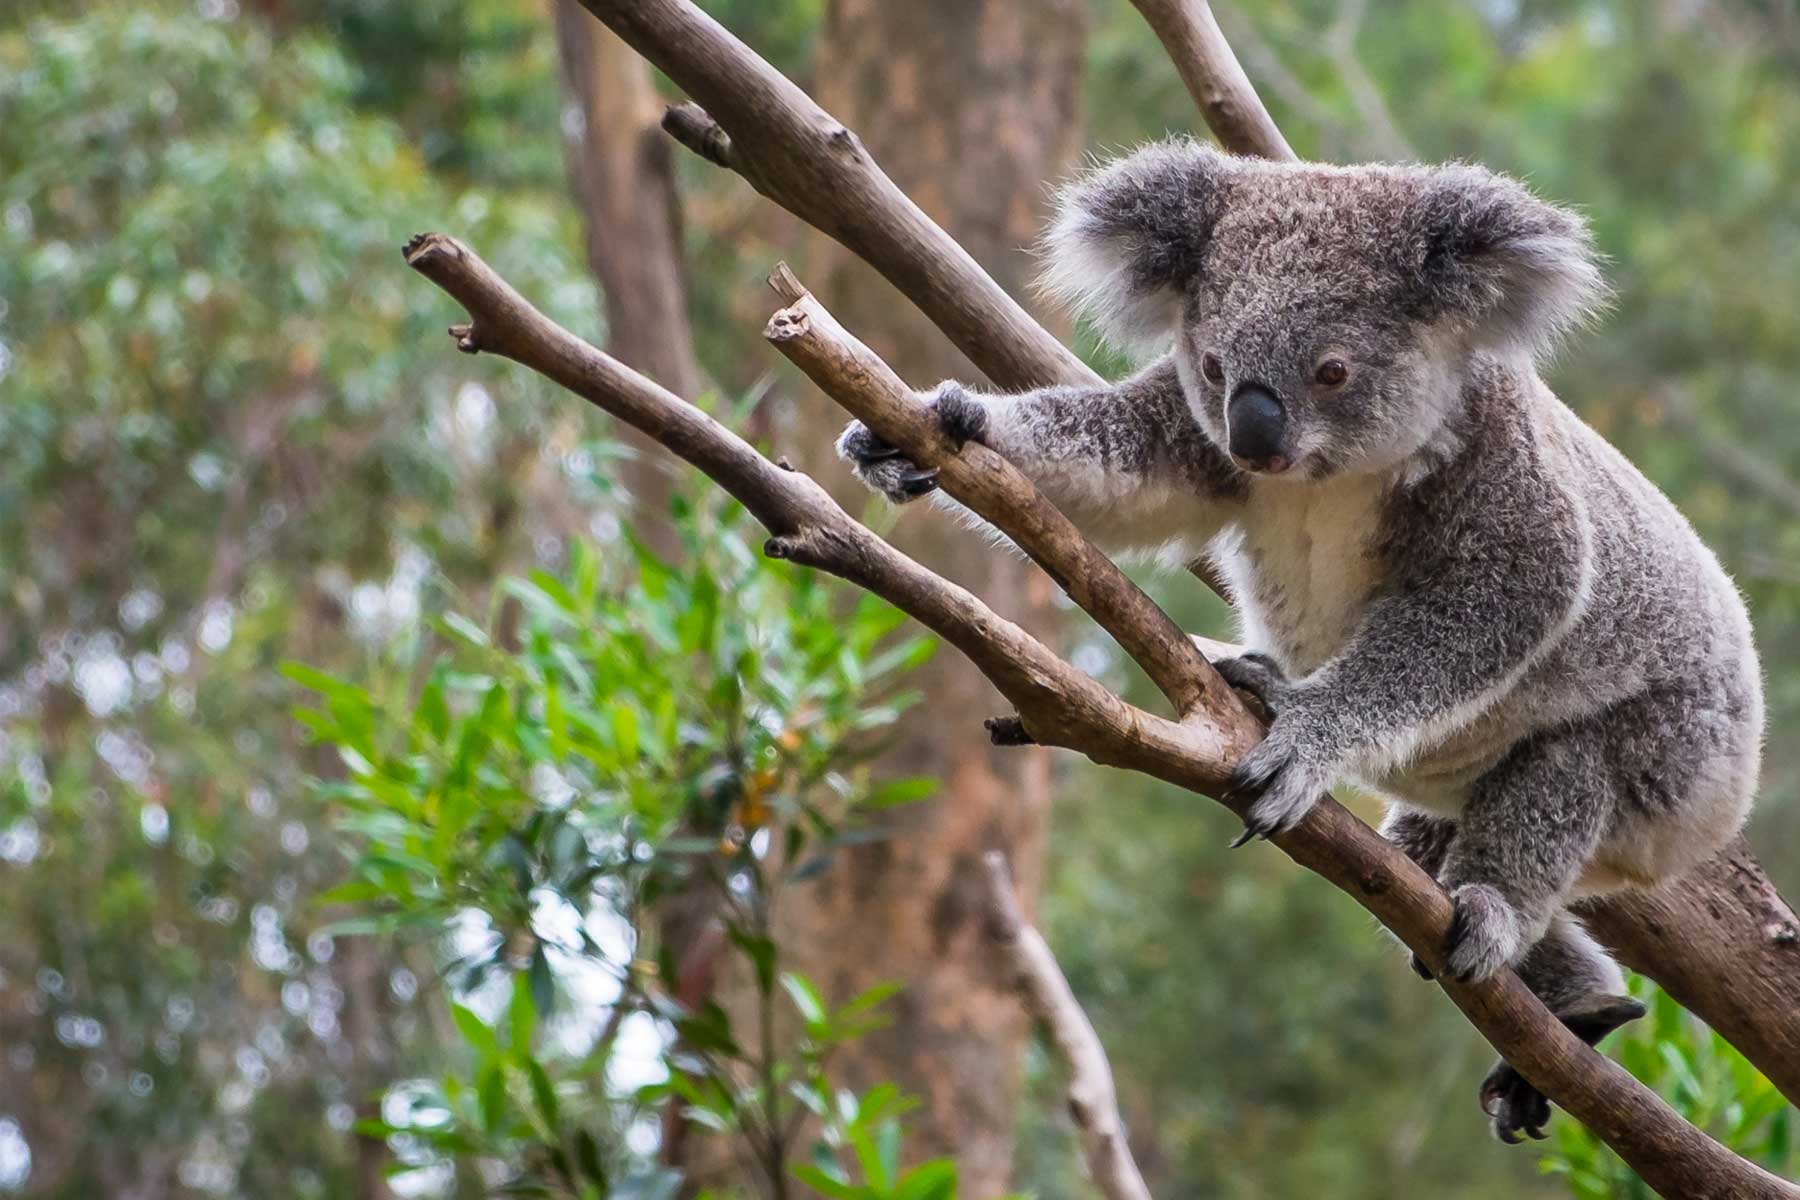 Helping to save the koala - a conservation genome blueprint